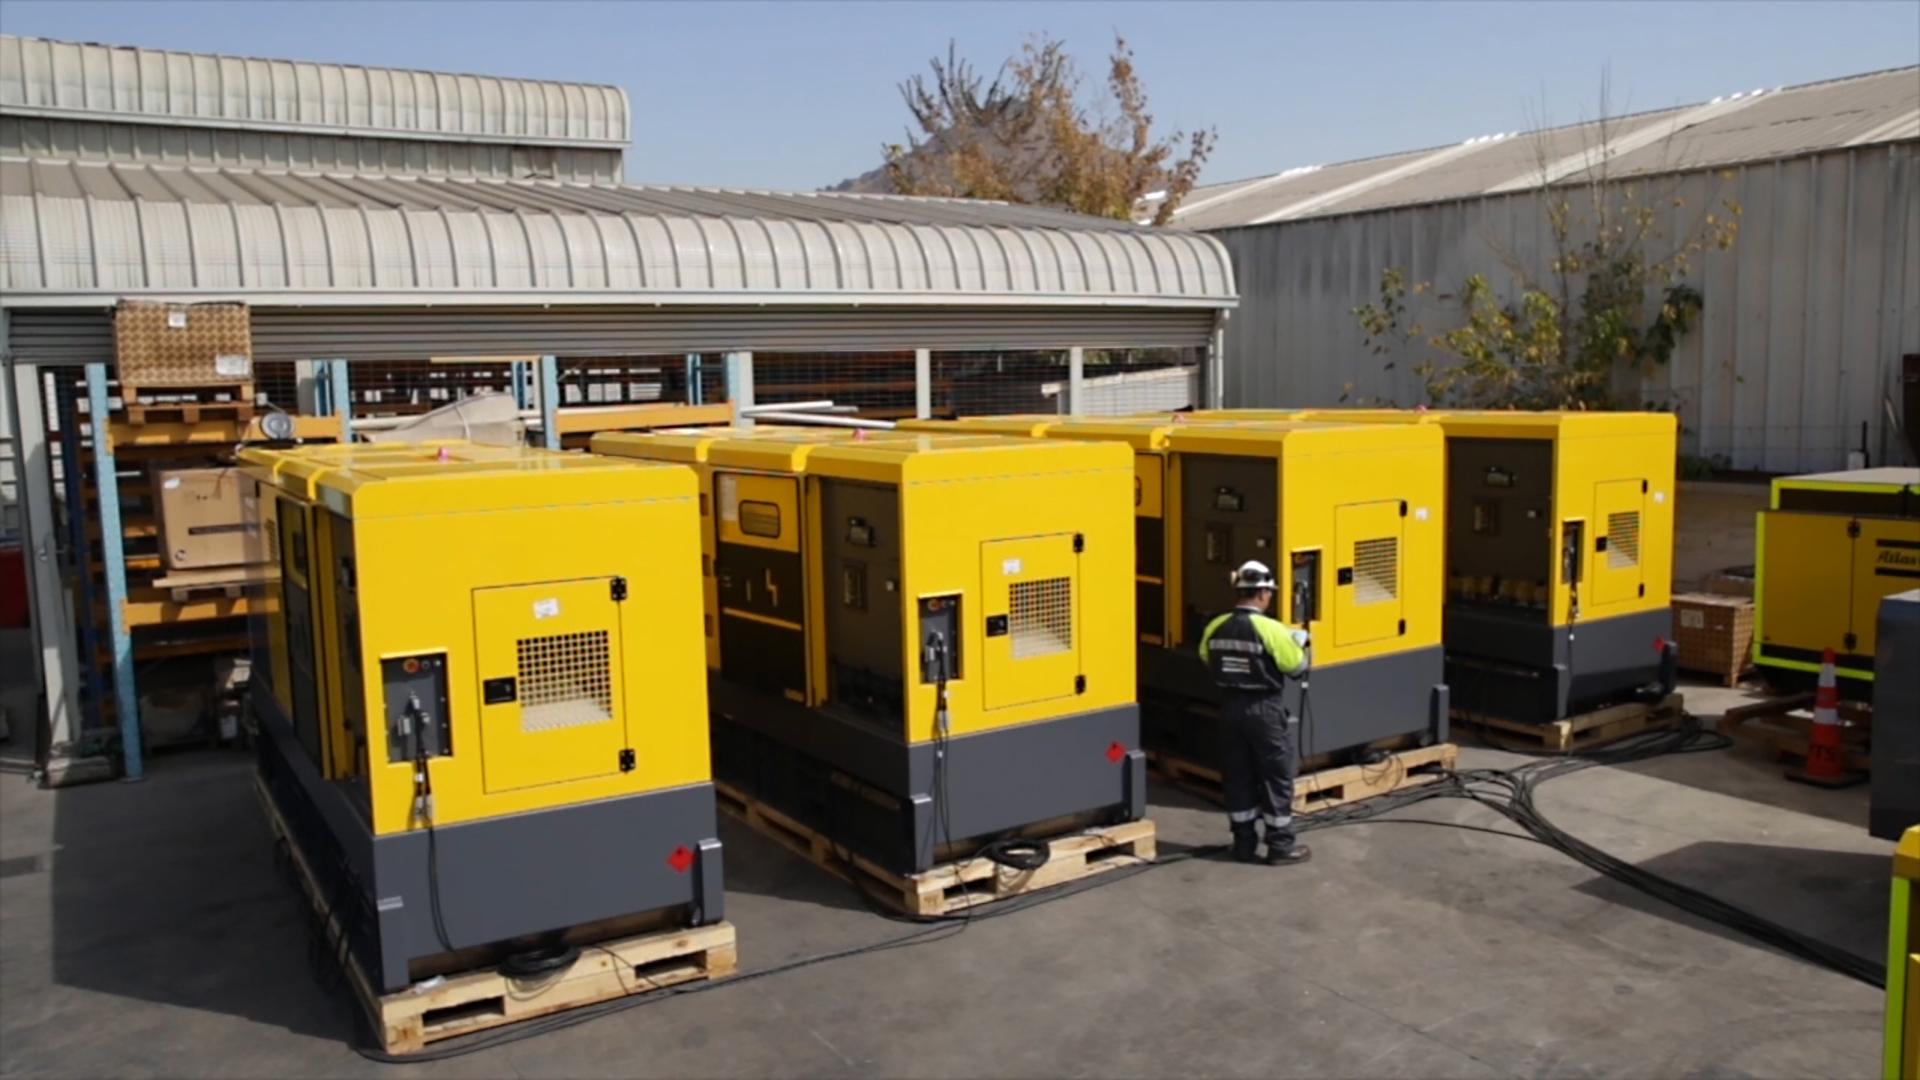 All QAS generators incorporate dual stage filtration with a safety cartridge and dual stage air cleaning.